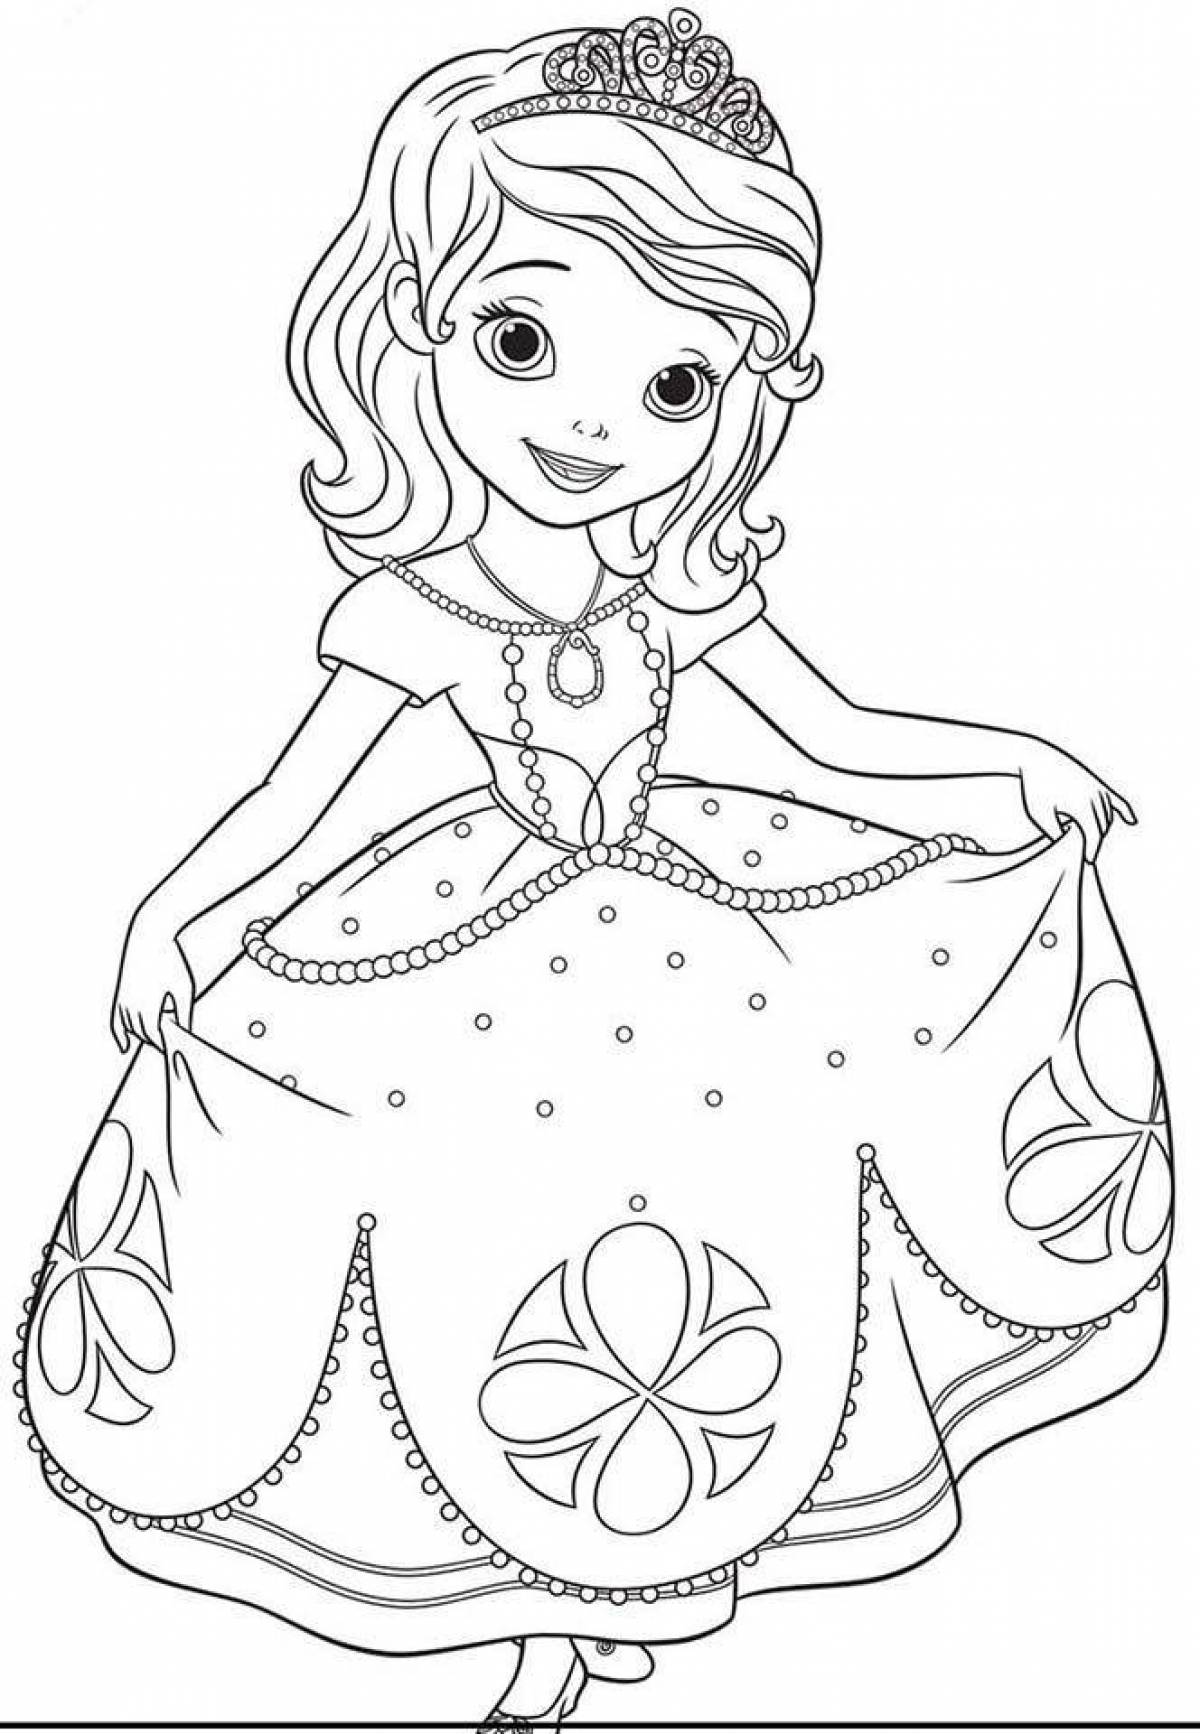 Luminous princess coloring book for children 3-4 years old